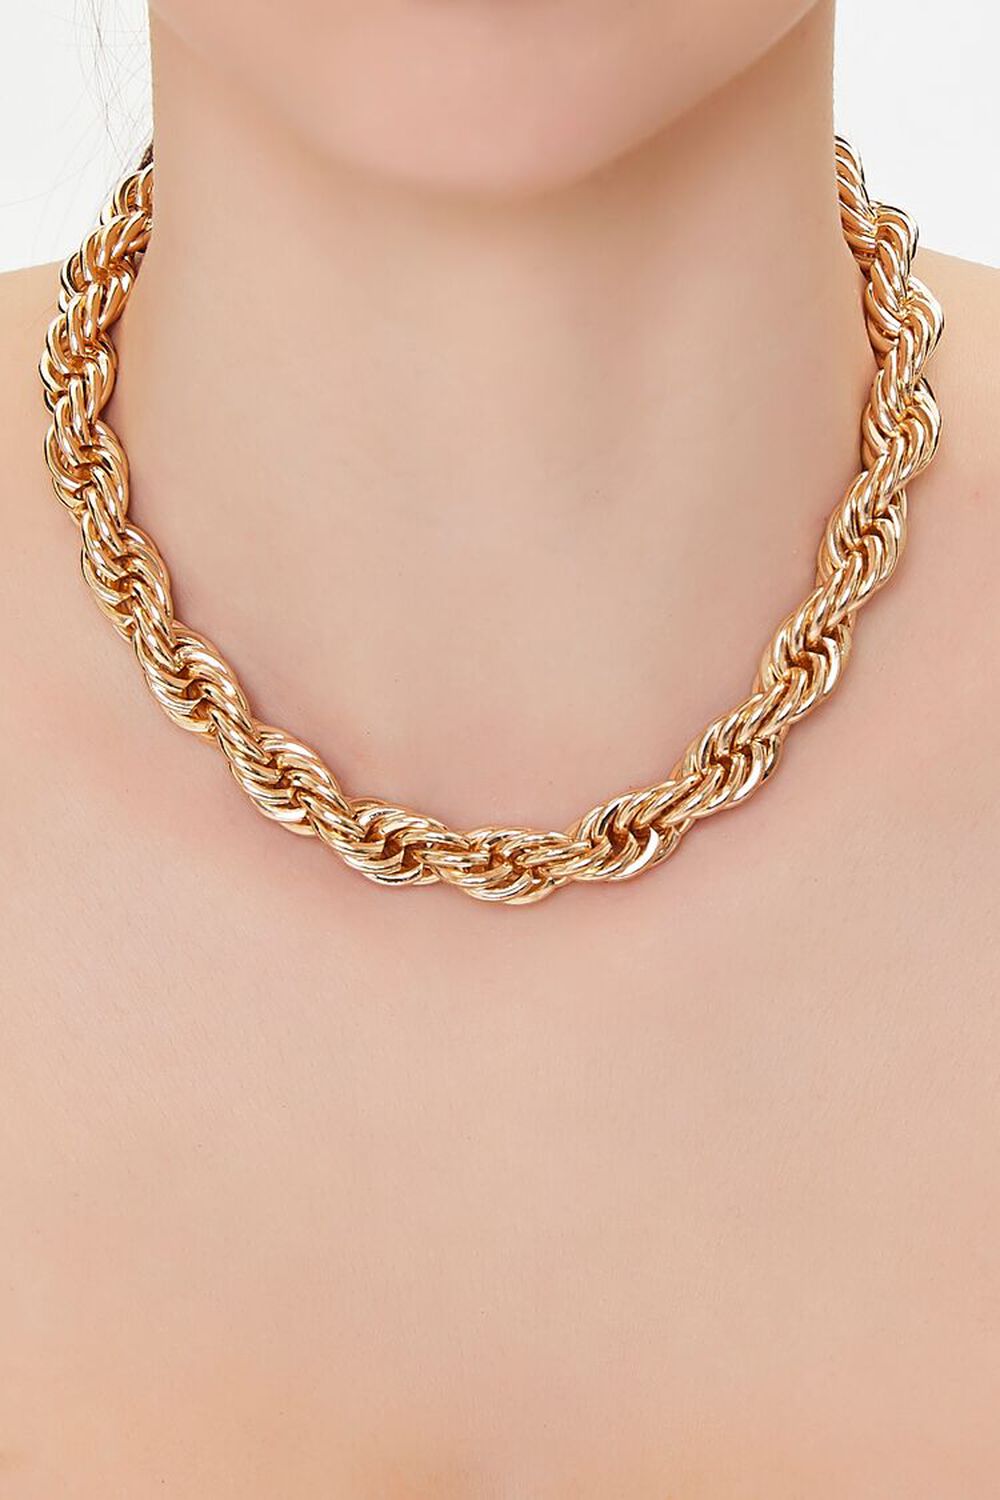 GOLD Chunky Rope Chain Necklace, image 1